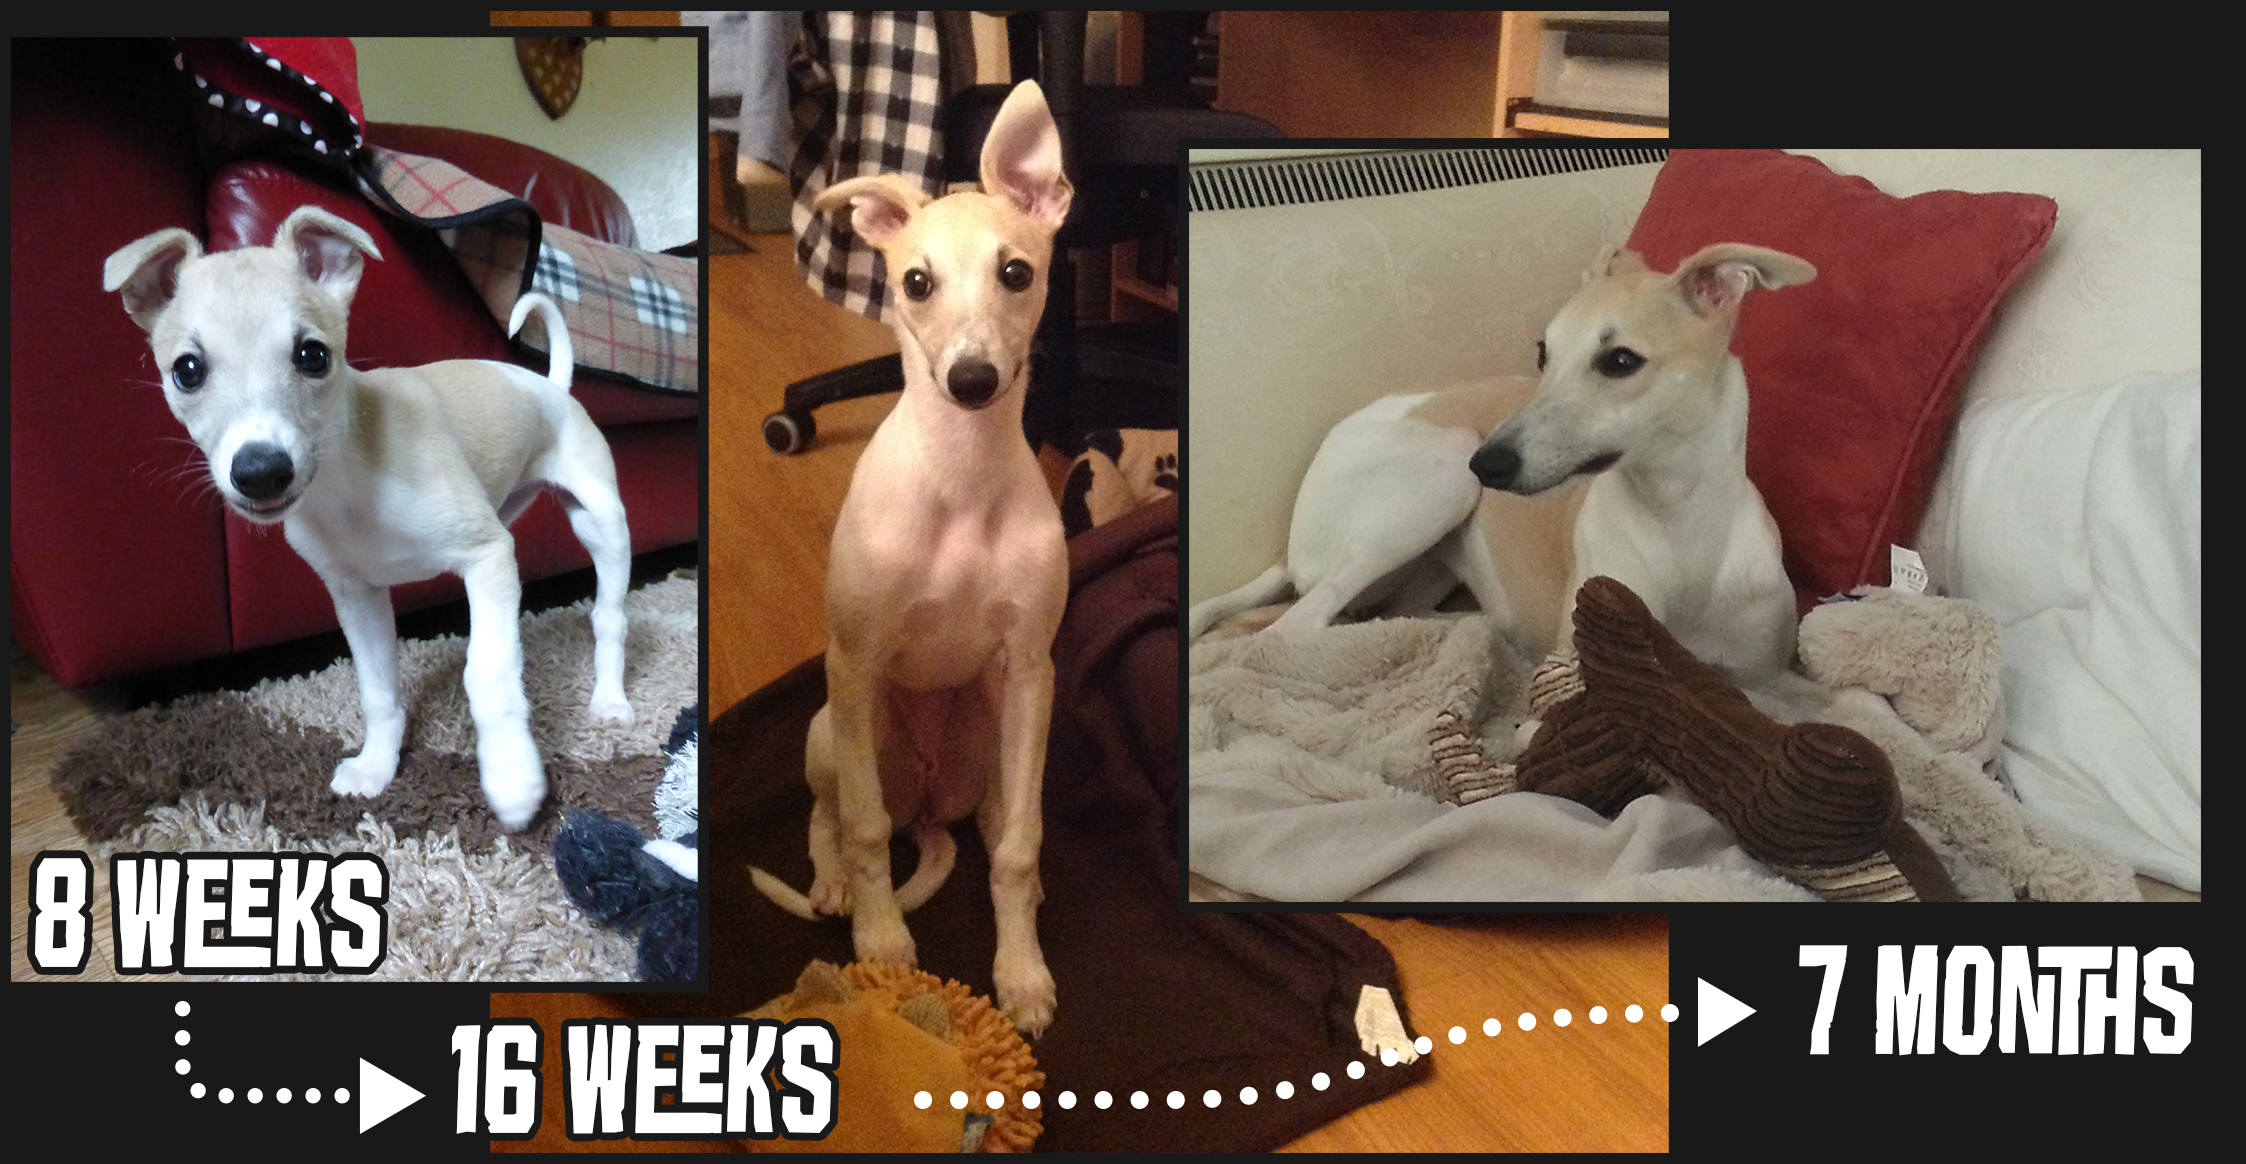 Miah 8 weeks to 7 months photo